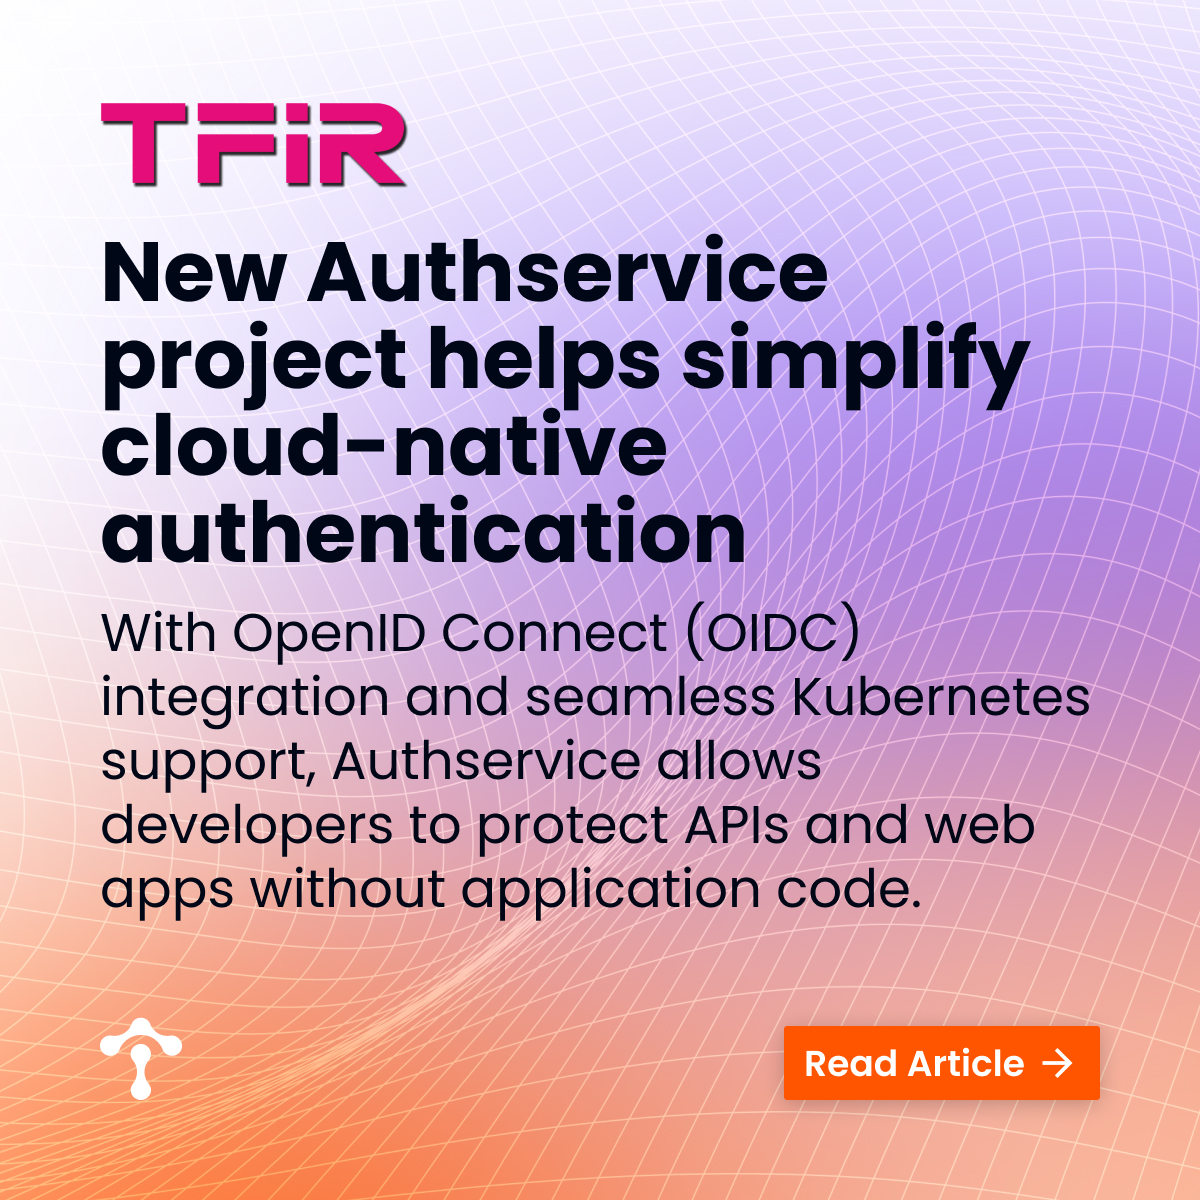 New Authservice project helps simplify cloud-native authentication tetr8.io/44bHGcR